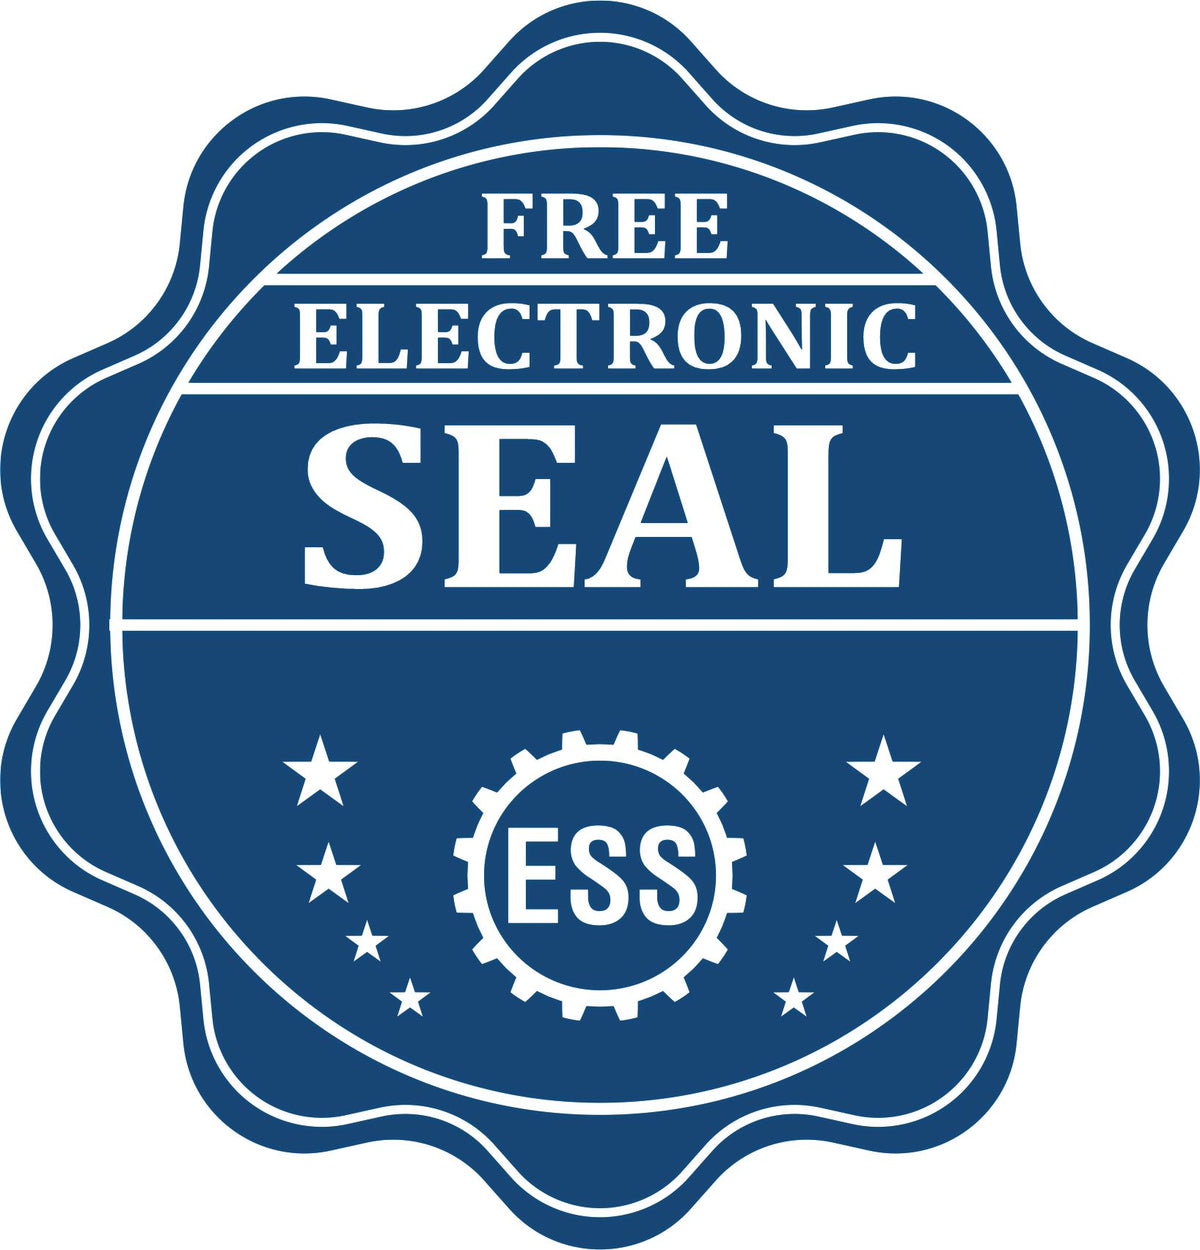 A badge showing a free electronic seal for the Hybrid Kentucky Landscape Architect Seal with stars and the ESS gear on the emblem.